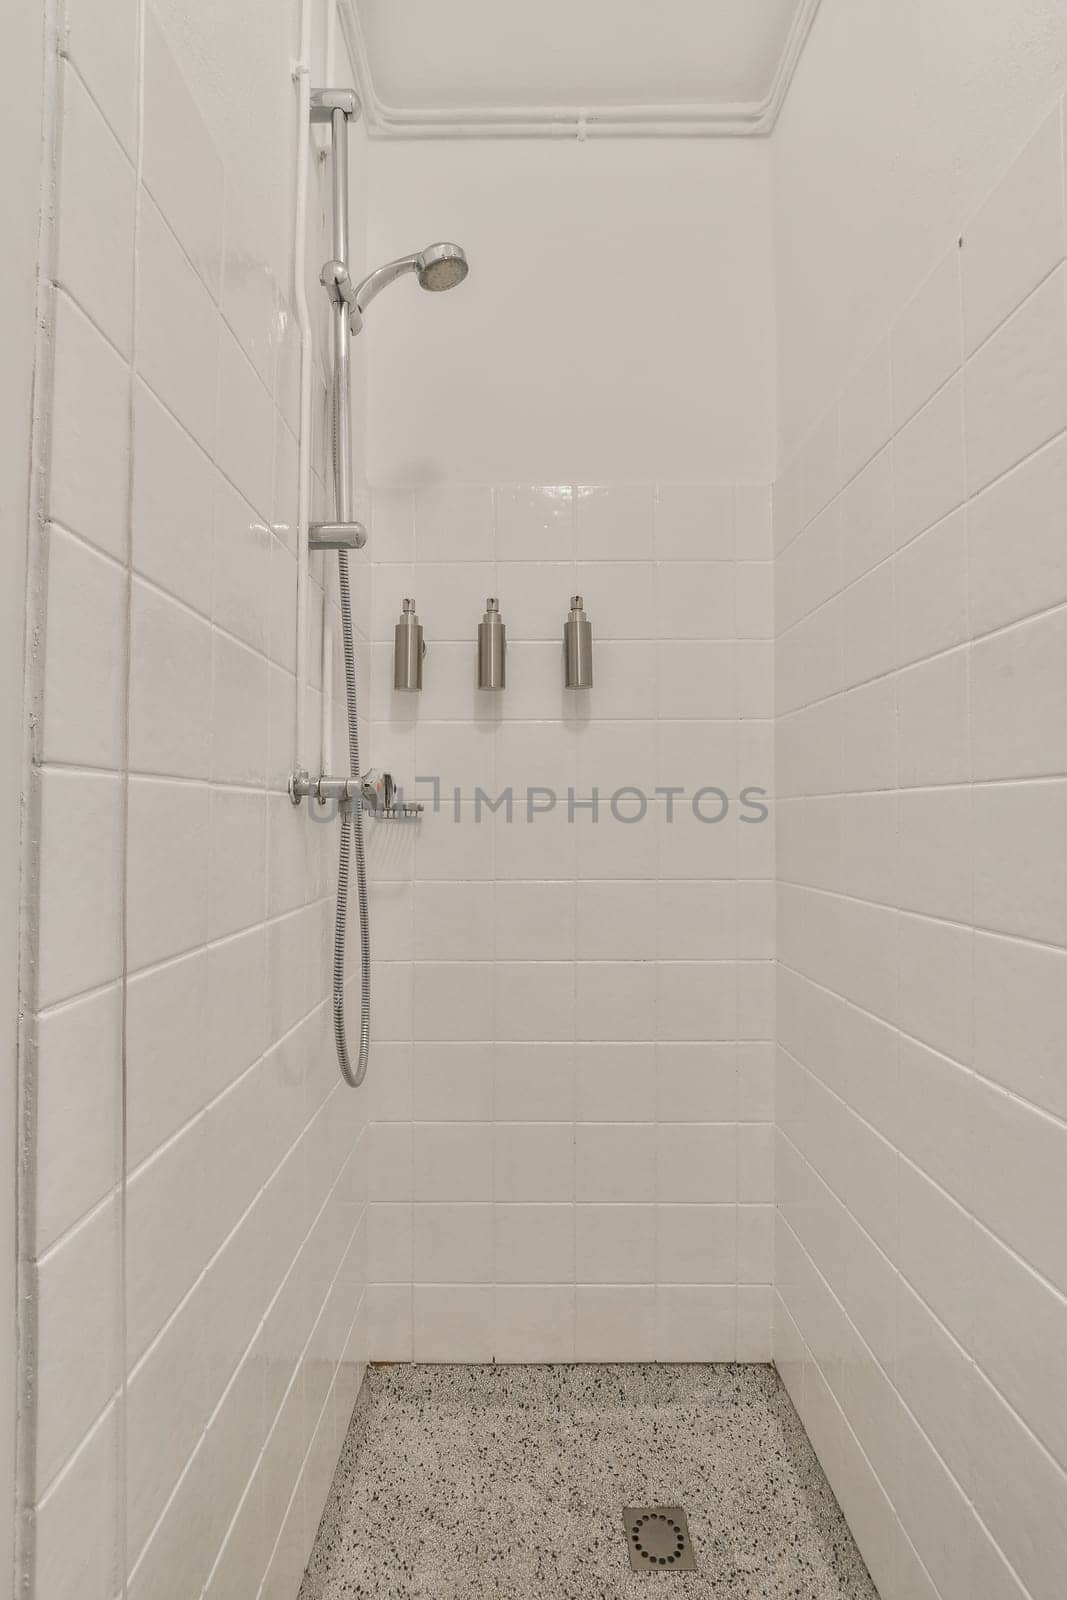 a walk in shower with white tiles on the walls and floor, it appears to be used as a bathtub